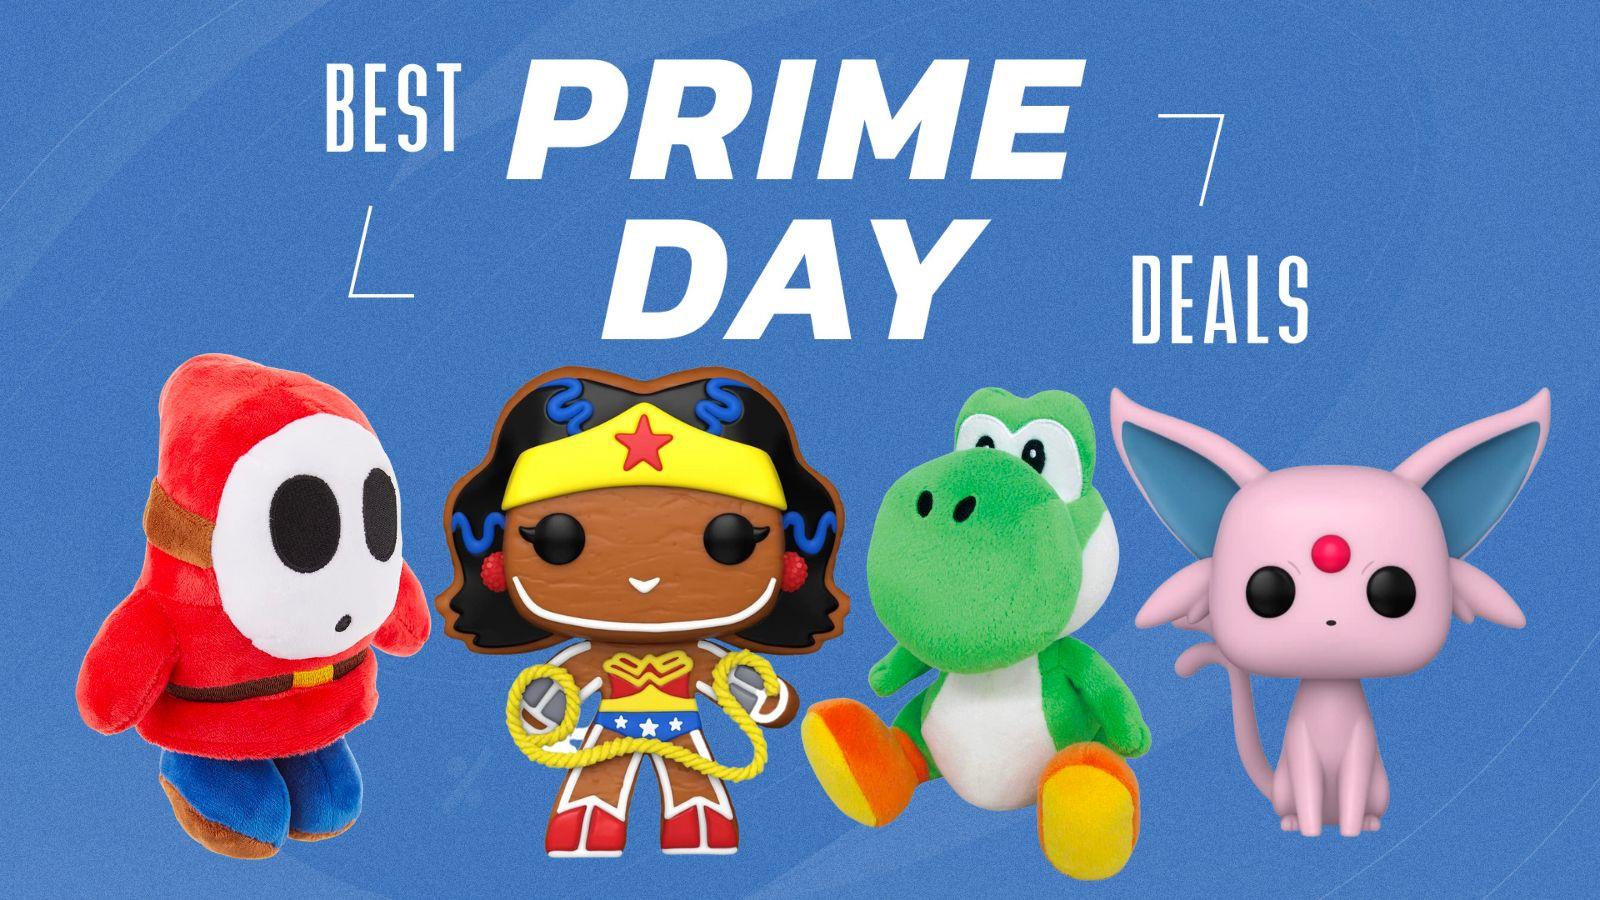 Prime Day deals on toys